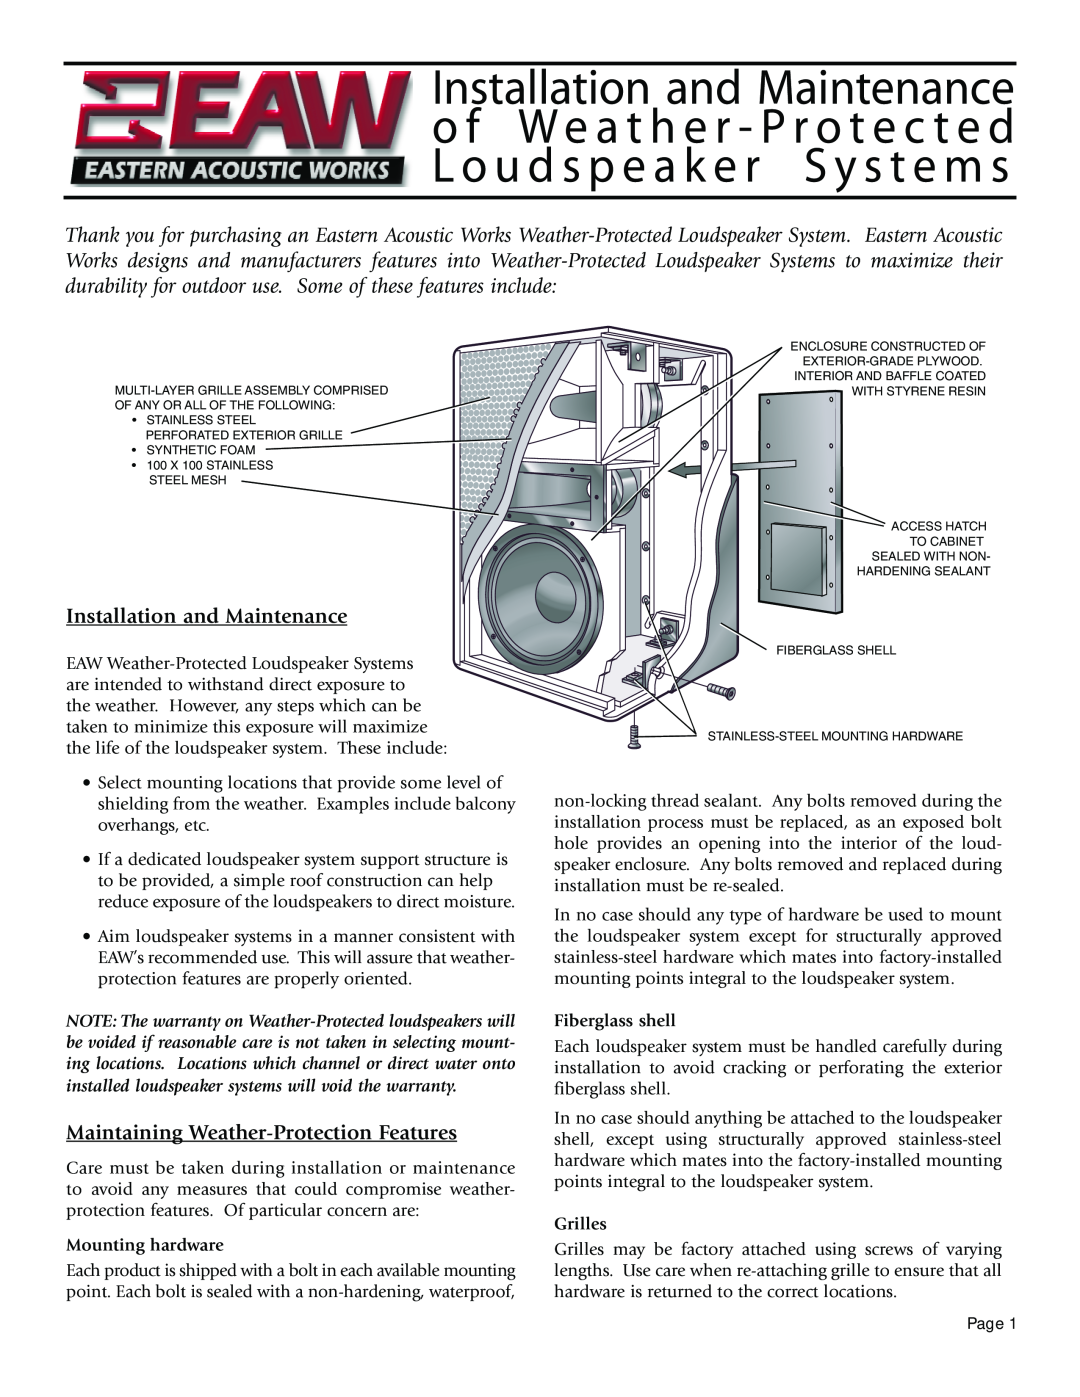 EAW Weather-Protected Loudspeaker System warranty Installation and Maintenance, Maintaining Weather-ProtectionFeatures 